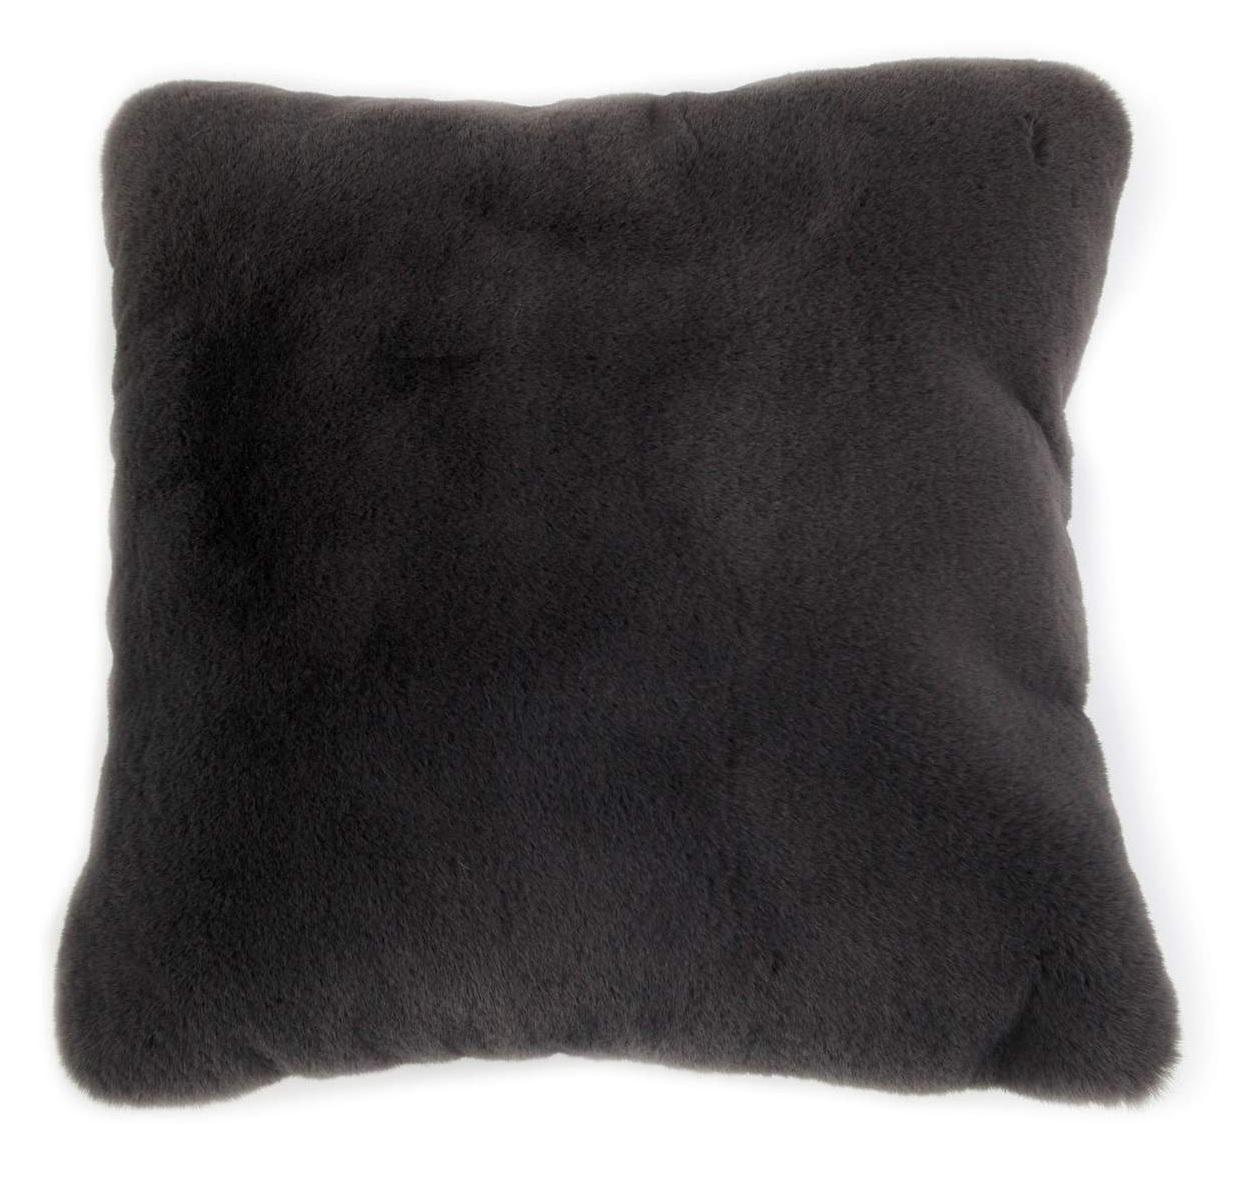 Contemporary Accent Pillow PL4140 Caparica PL4140 in Charcoal 